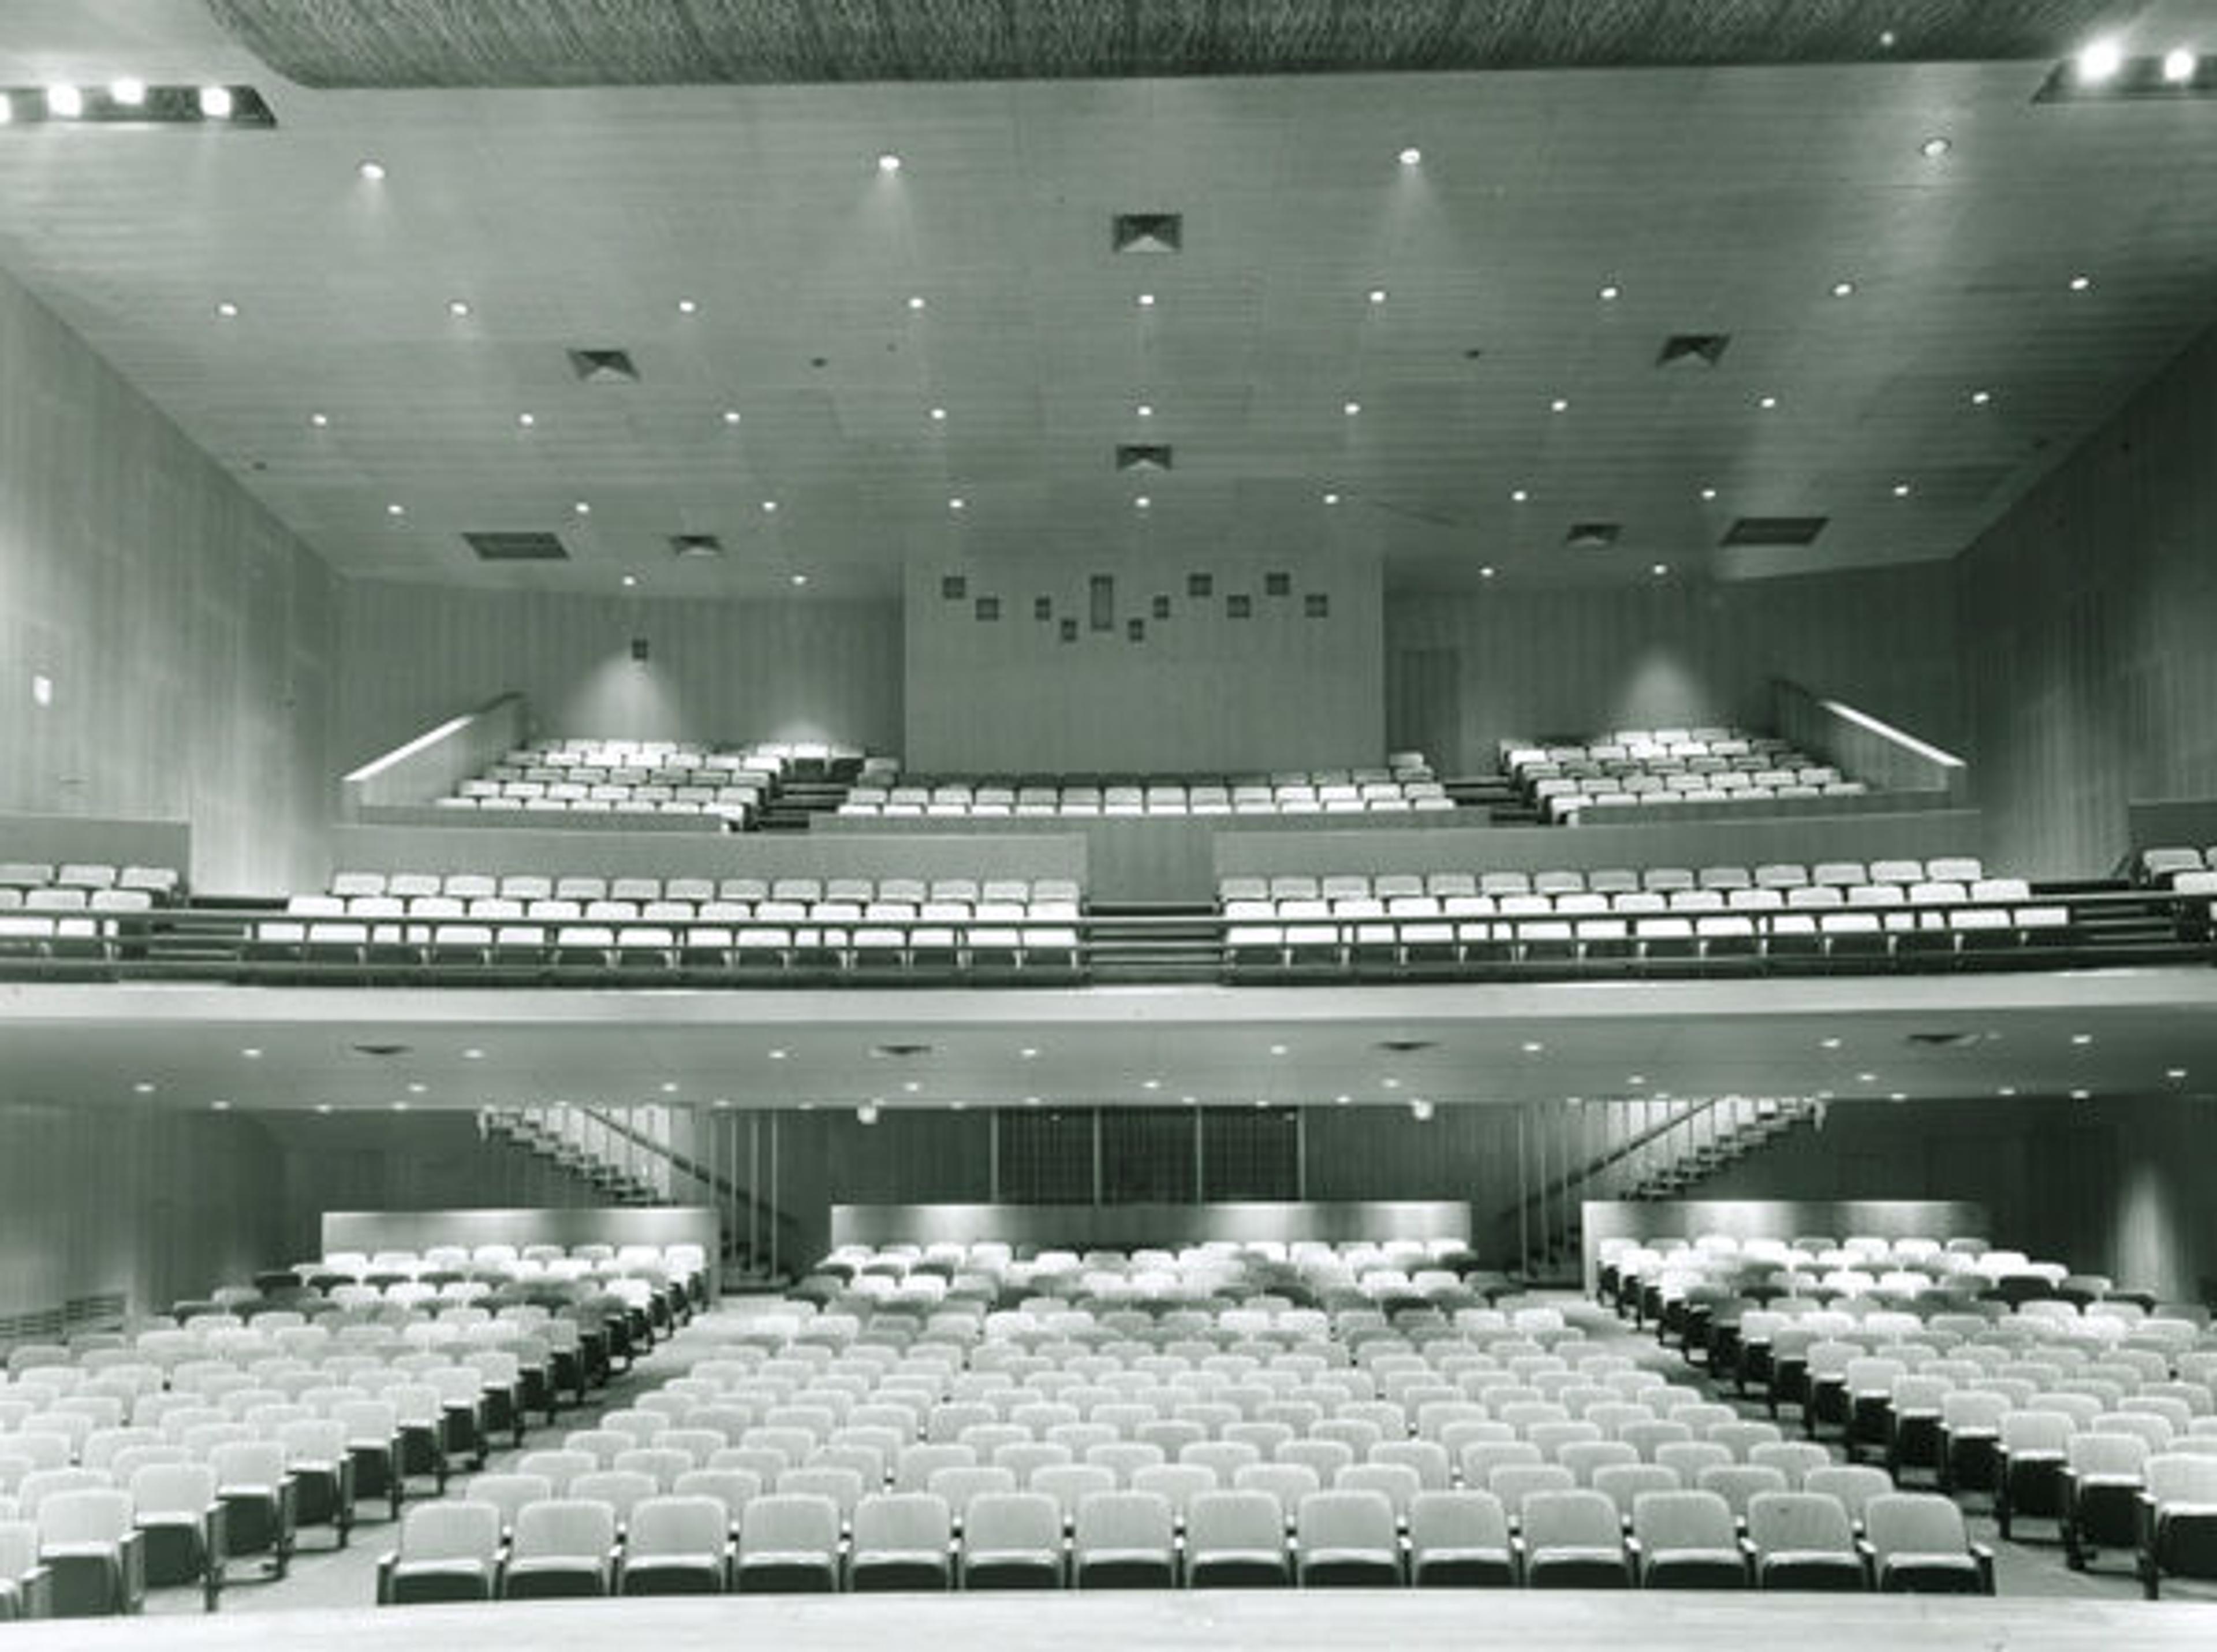 The Metropolitan Museum of Art, Grace Rainey Rogers Auditorium; View looking from the stage to the seats; Architects: Voorhees, Walker, Foley and Smith. Photographed in 1954. © The Metropolitan Museum of Art